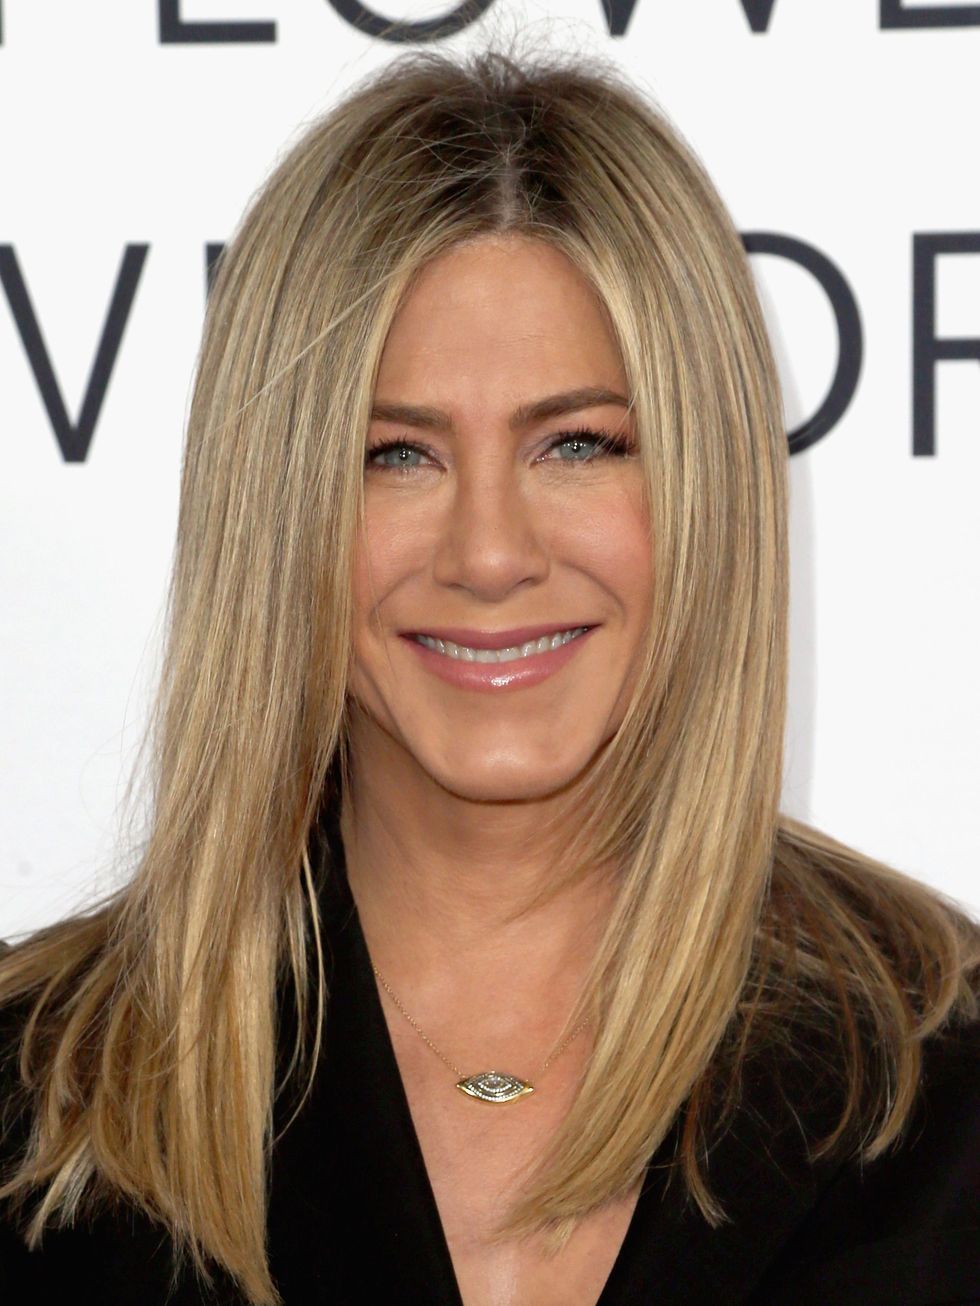 Jennifer Aniston at the premiere of Mother's Day